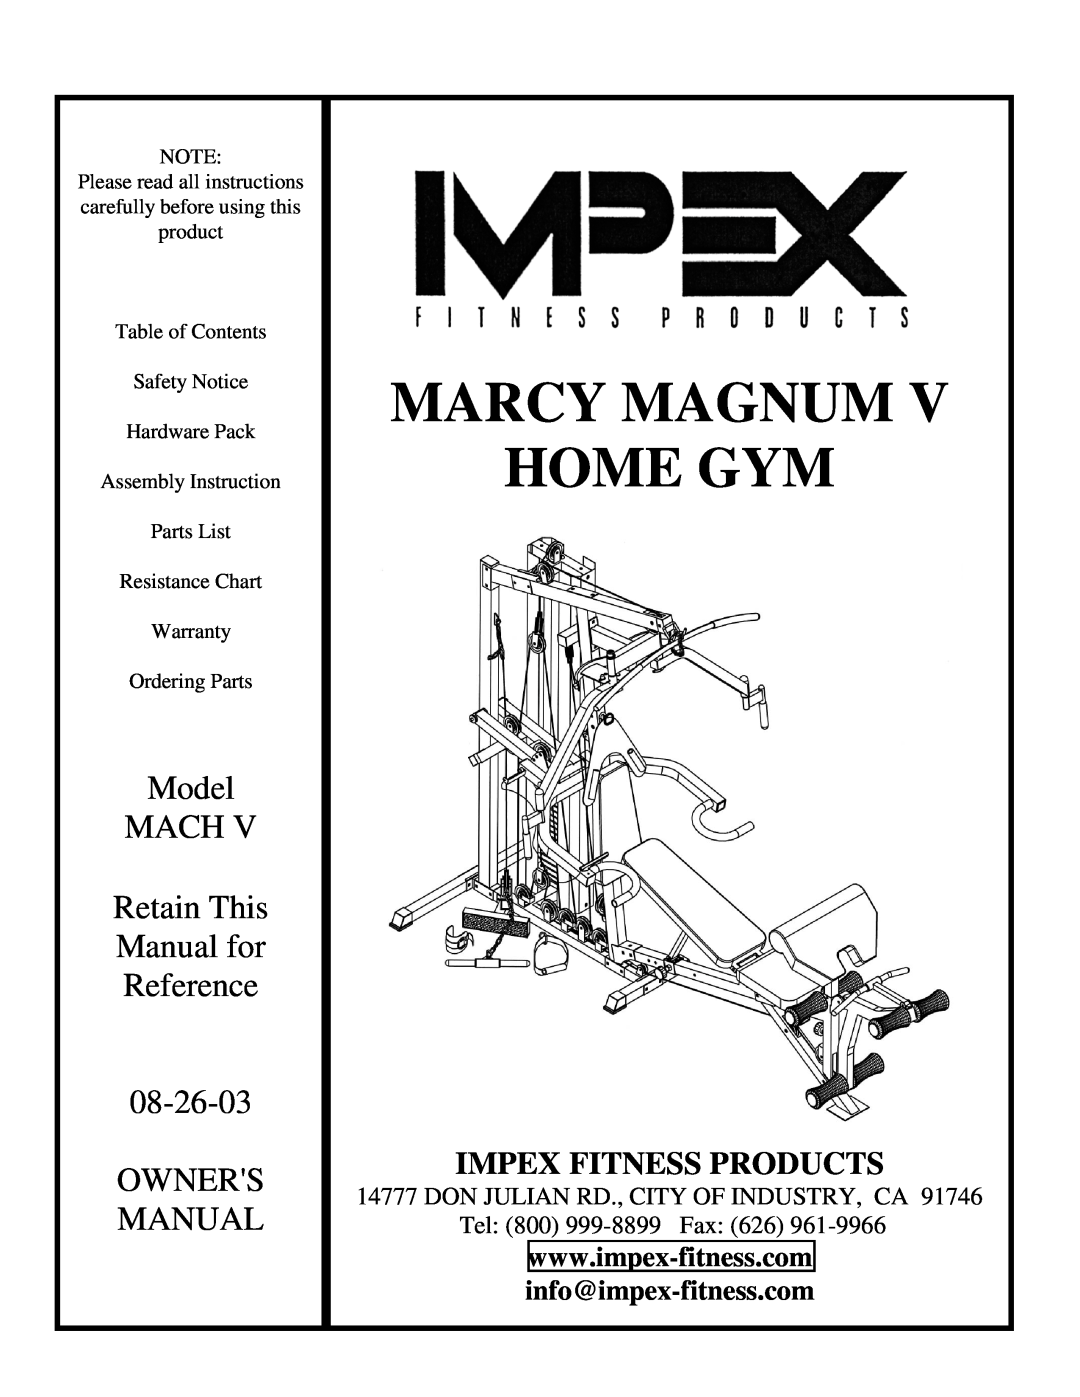 Impex MACH V manual Impex Fitness Products, info@impex-fitness.com, Marcy Magnum, Home Gym, Model, Mach, Retain This 